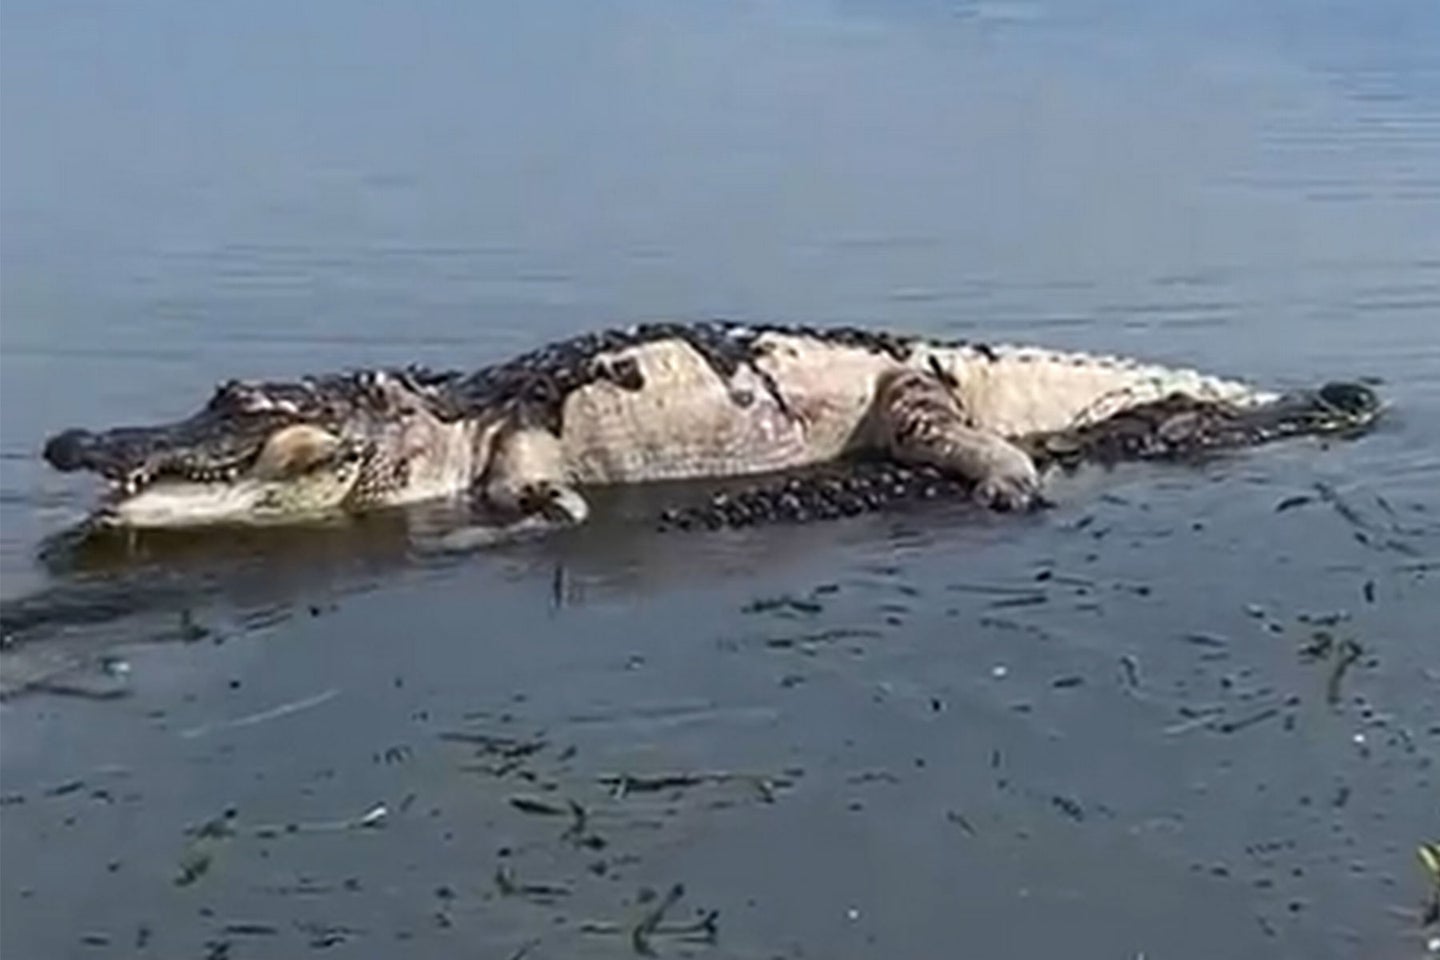 Watch: Massive Alligator Swims Through Florida Lake Dragging a Dead Gator in Its Jaws